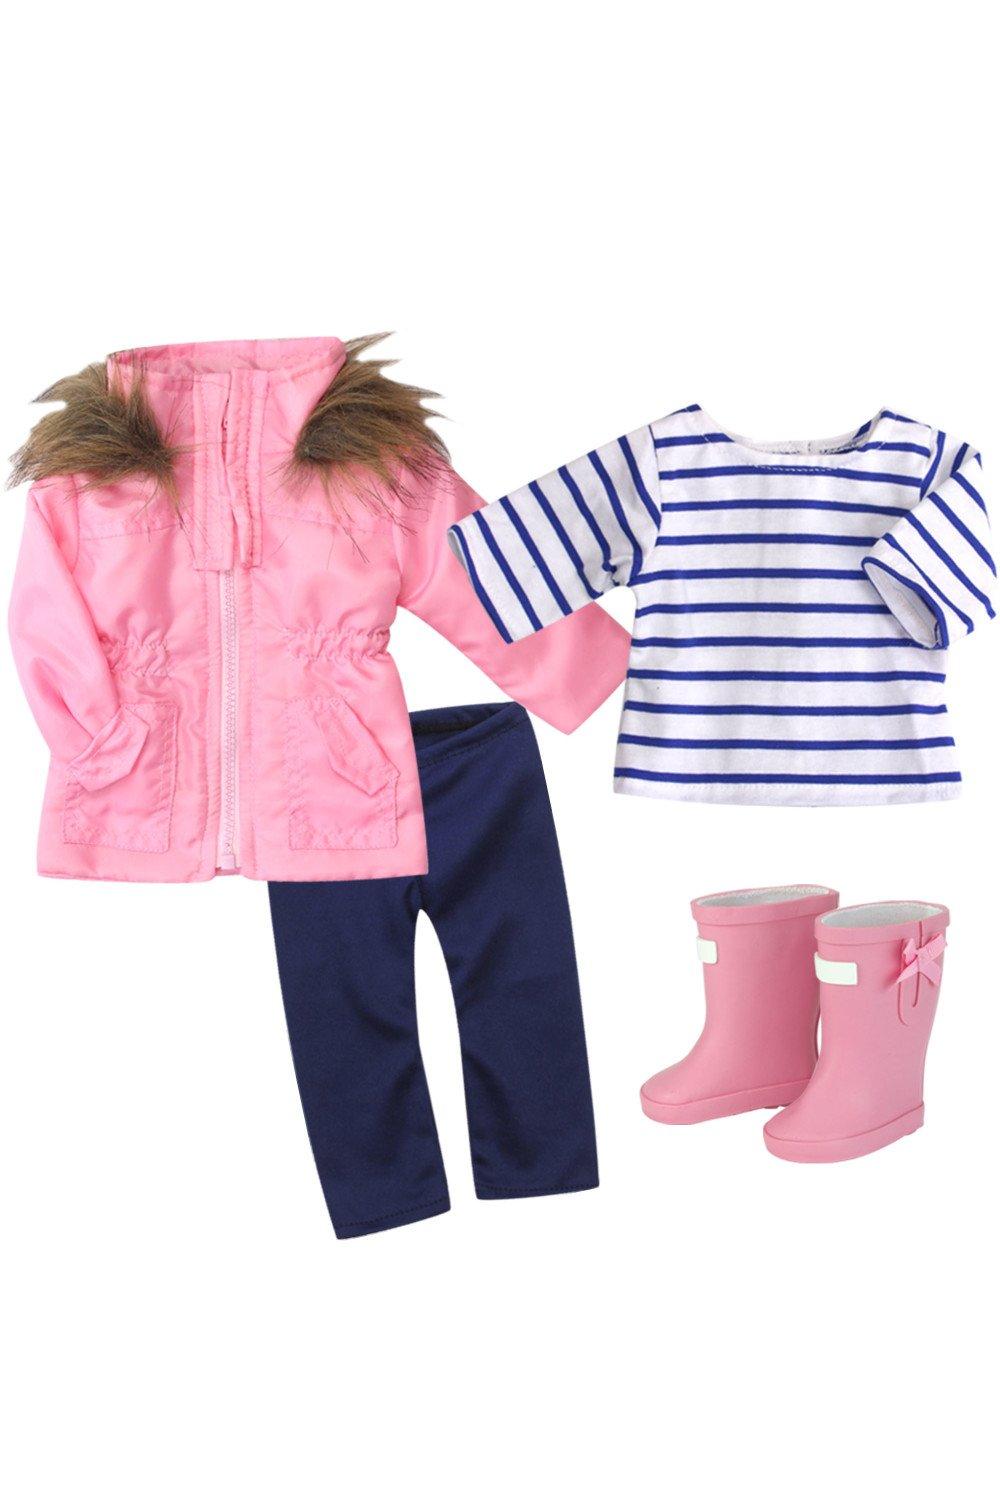 Sophia’s 18" Doll Pink Parka Jacket, Leggings & Top with Doll Wellies